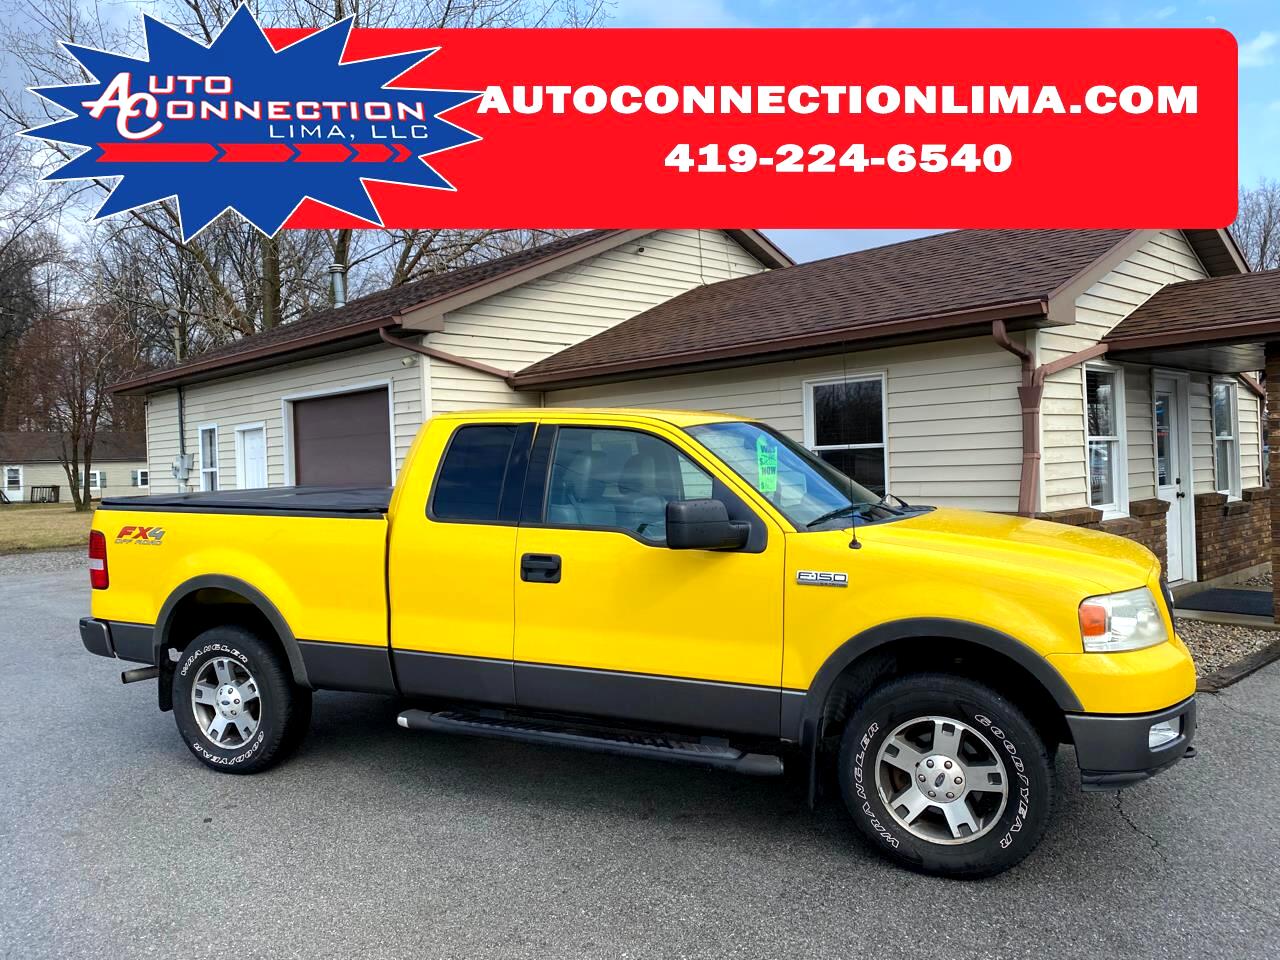 Ford F-150 Supercab 145" Lariat 4WD 2004